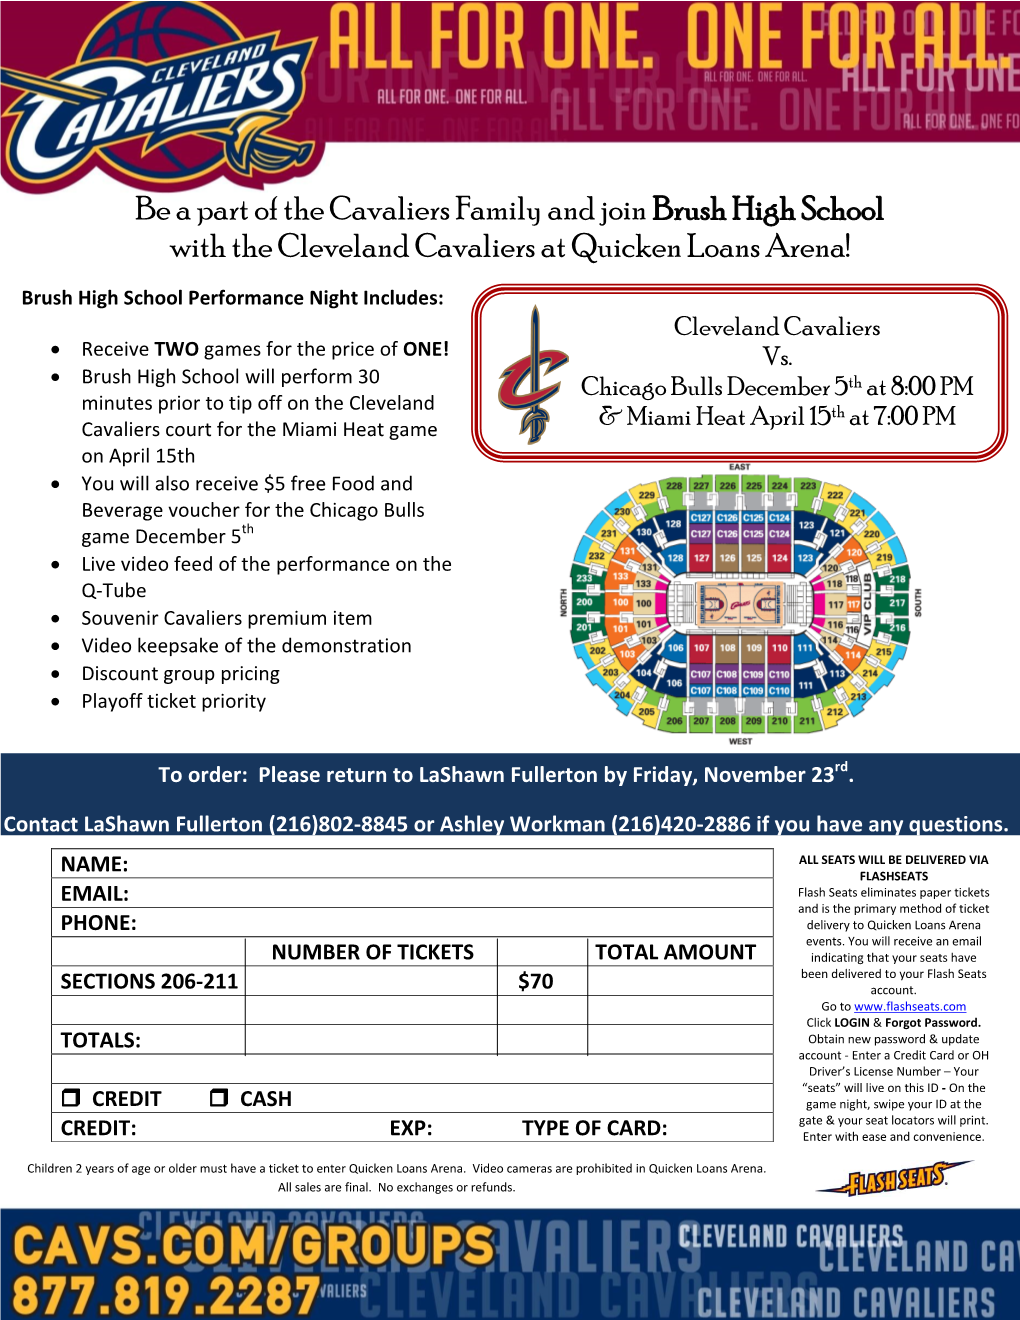 Be a Part of the Cavaliers Family and Join Brush High School with the Cleveland Cavaliers at Quicken Loans Arena!